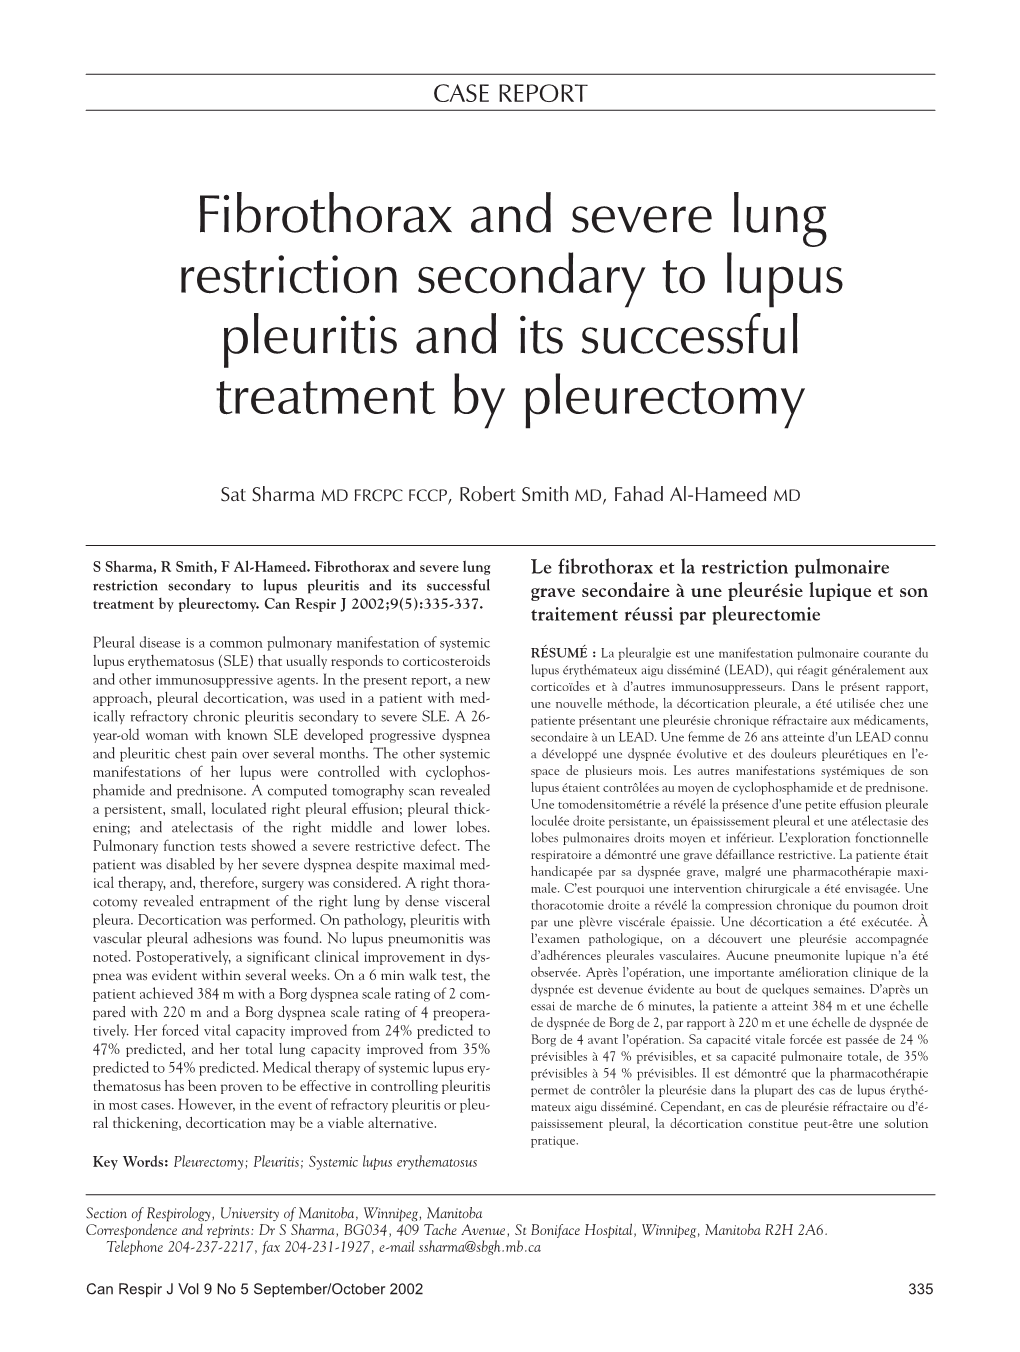 Fibrothorax and Severe Lung Restriction Secondary to Lupus Pleuritis and Its Successful Treatment by Pleurectomy